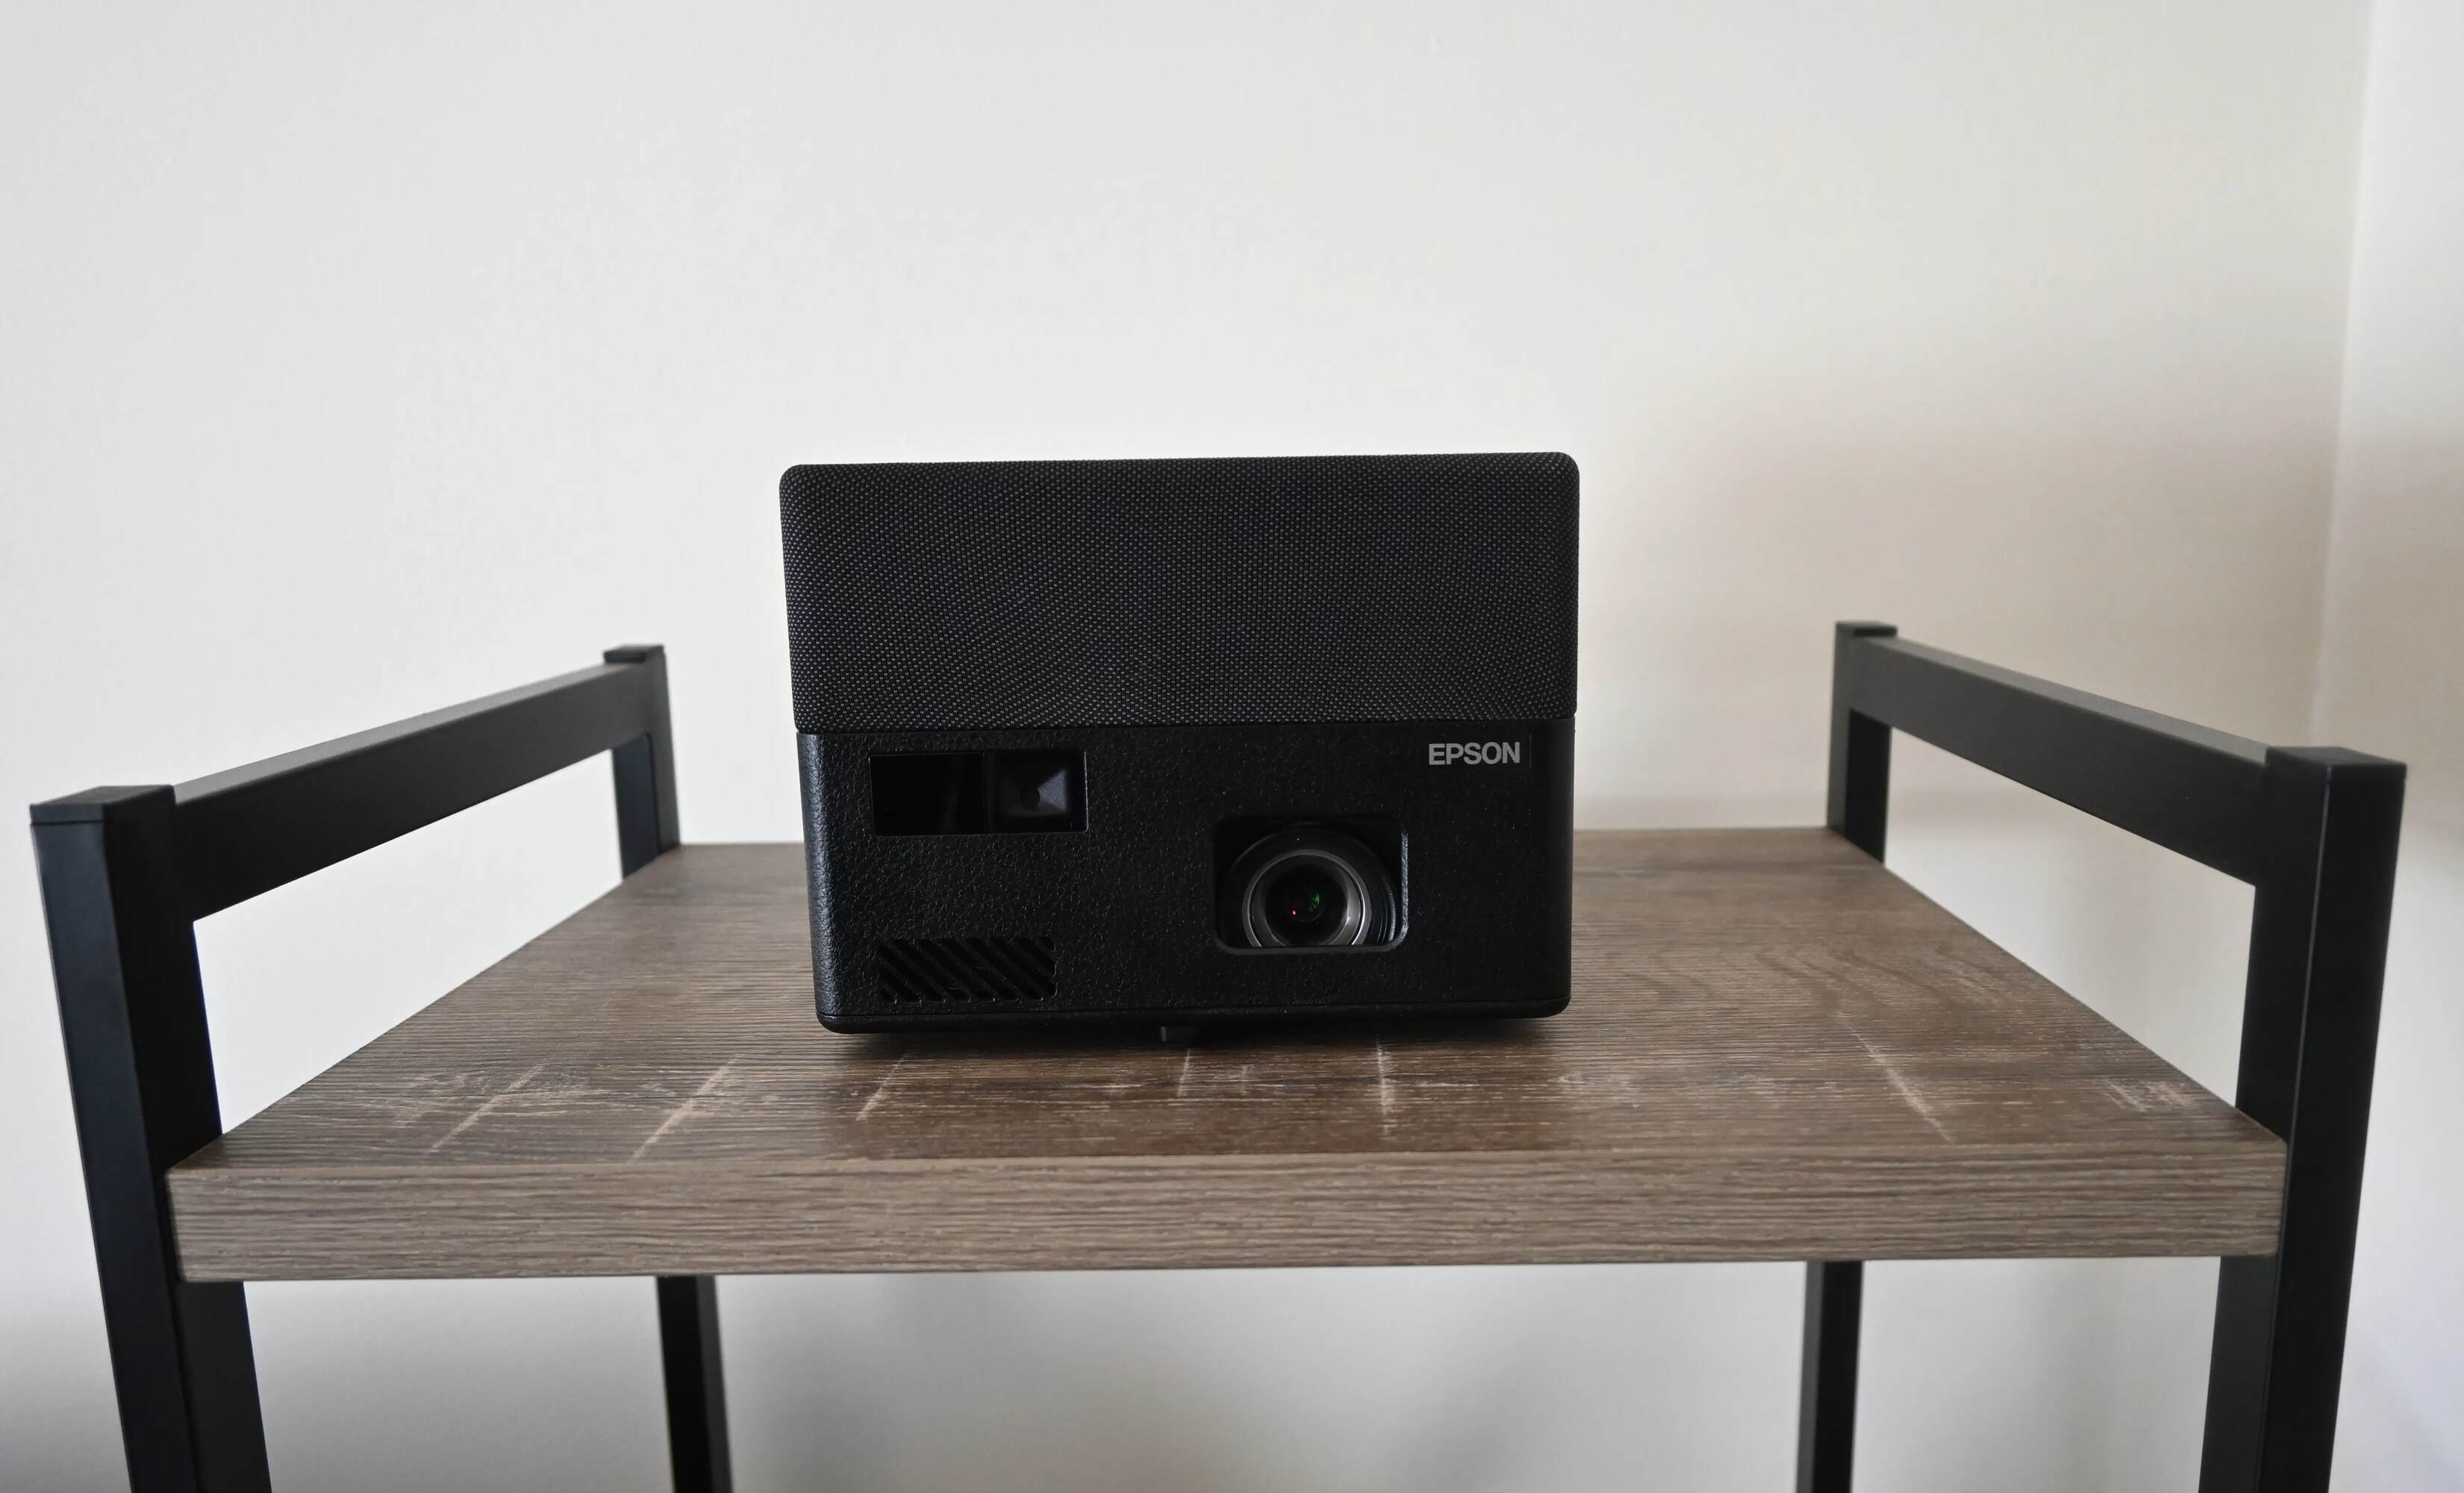 How To Connect A Projector To A Bluetooth Speaker